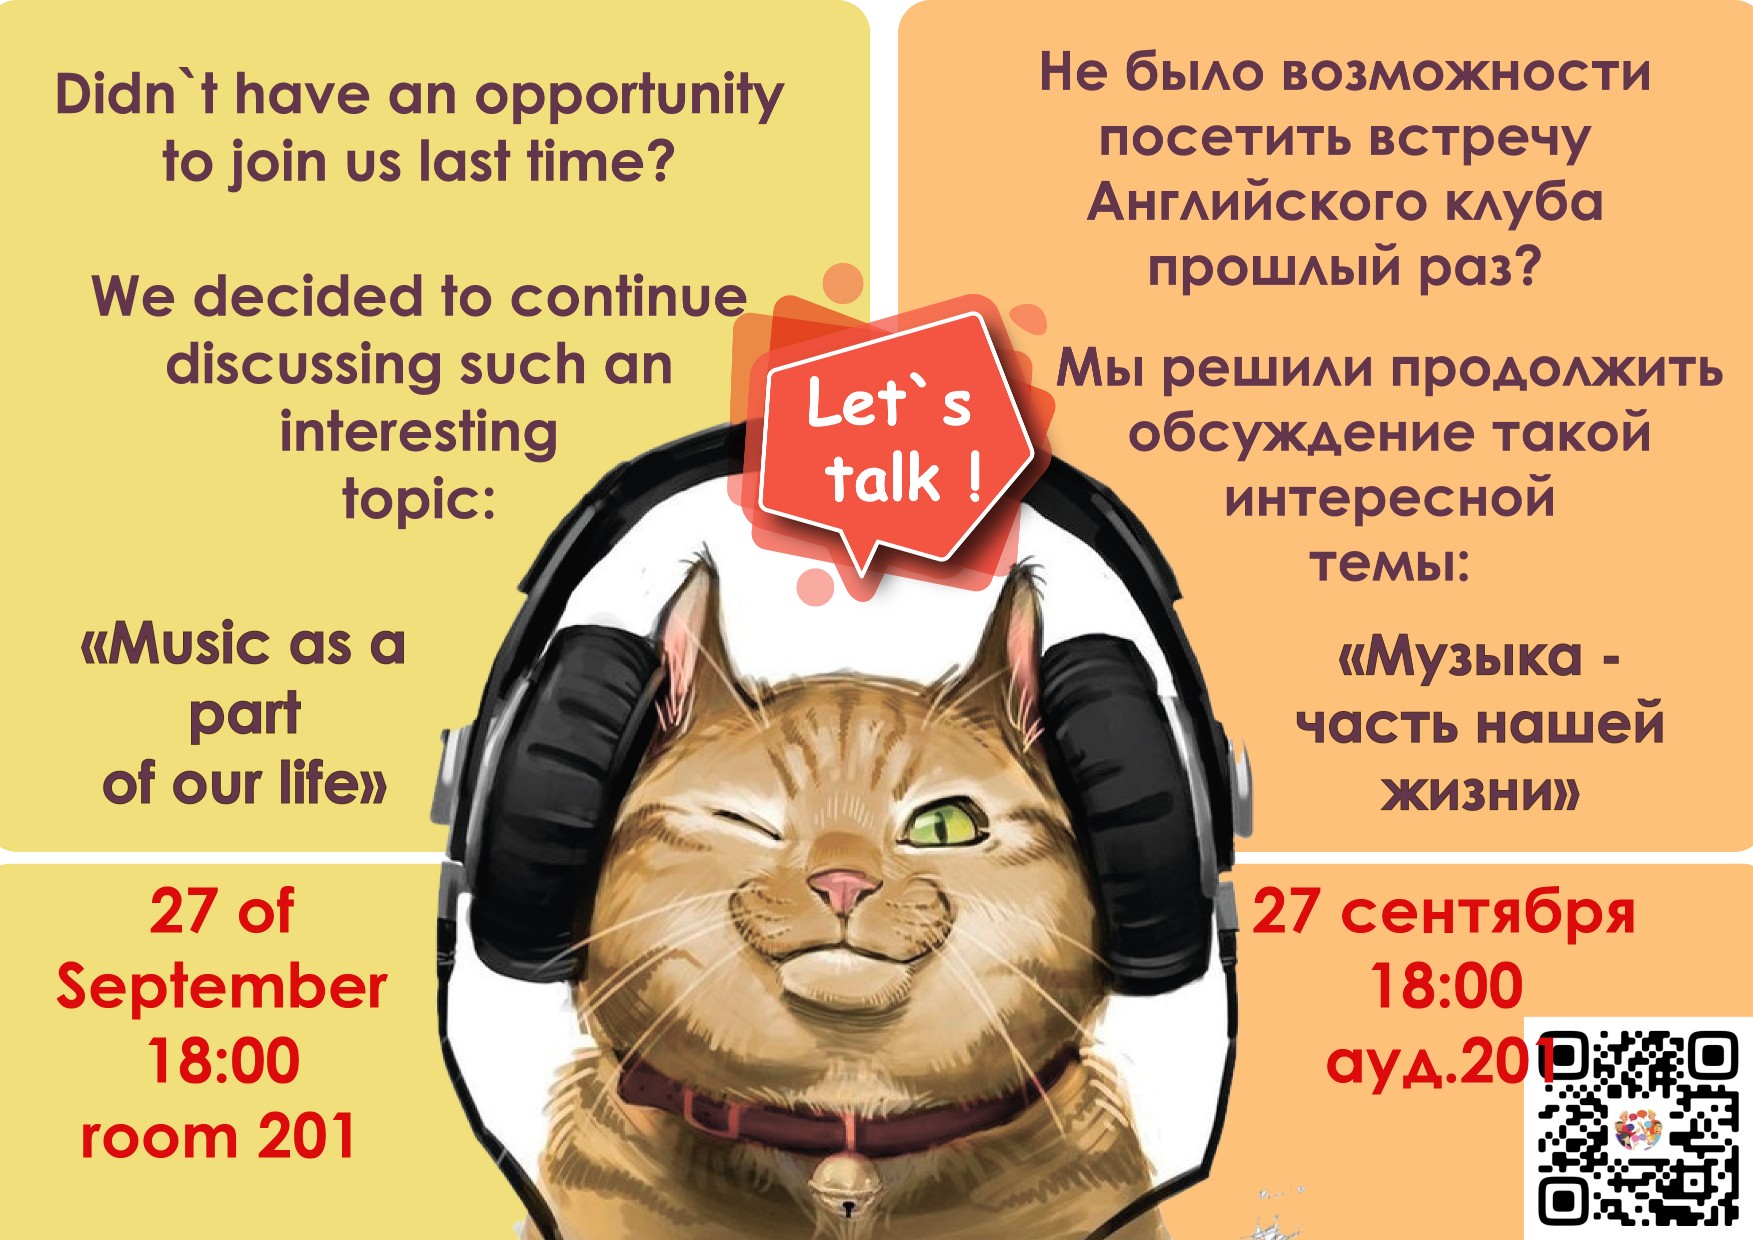 Топик: Music in our life